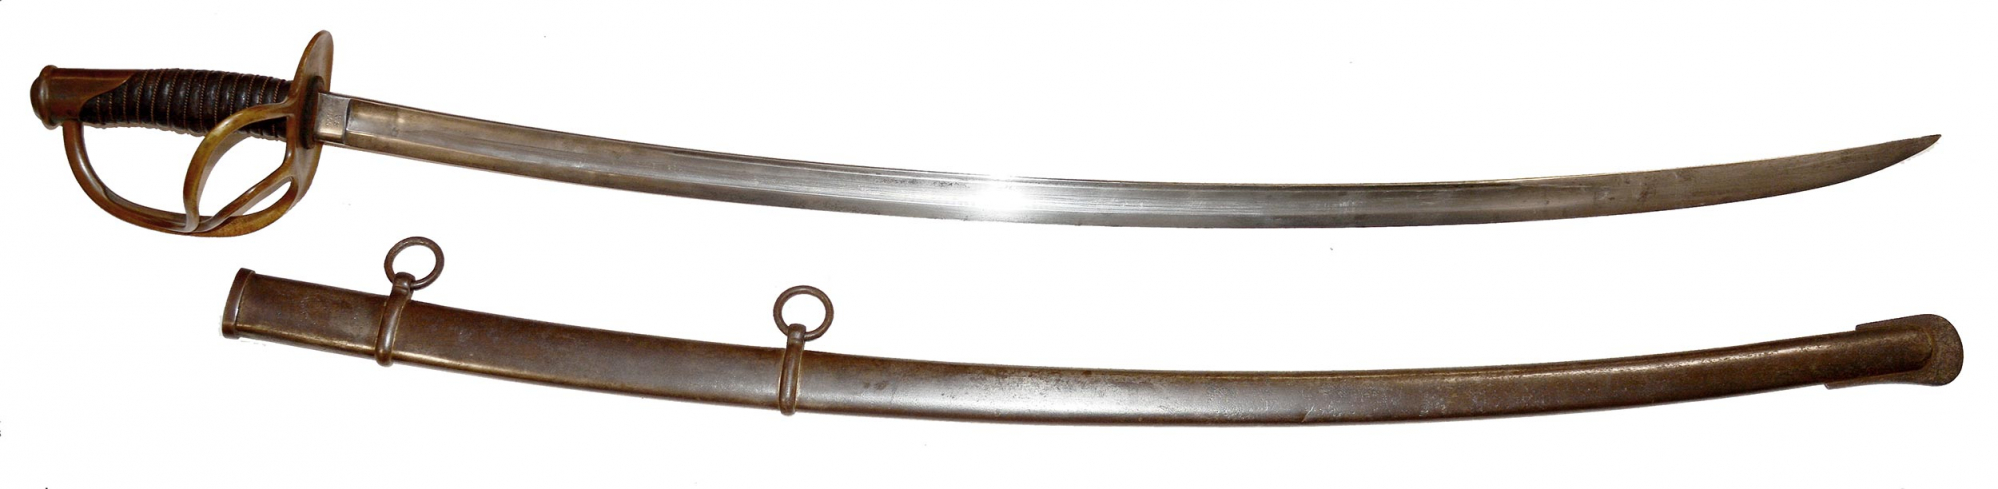 MODEL 1860 CAVALRY SABER & SCABBARD BY ROBY